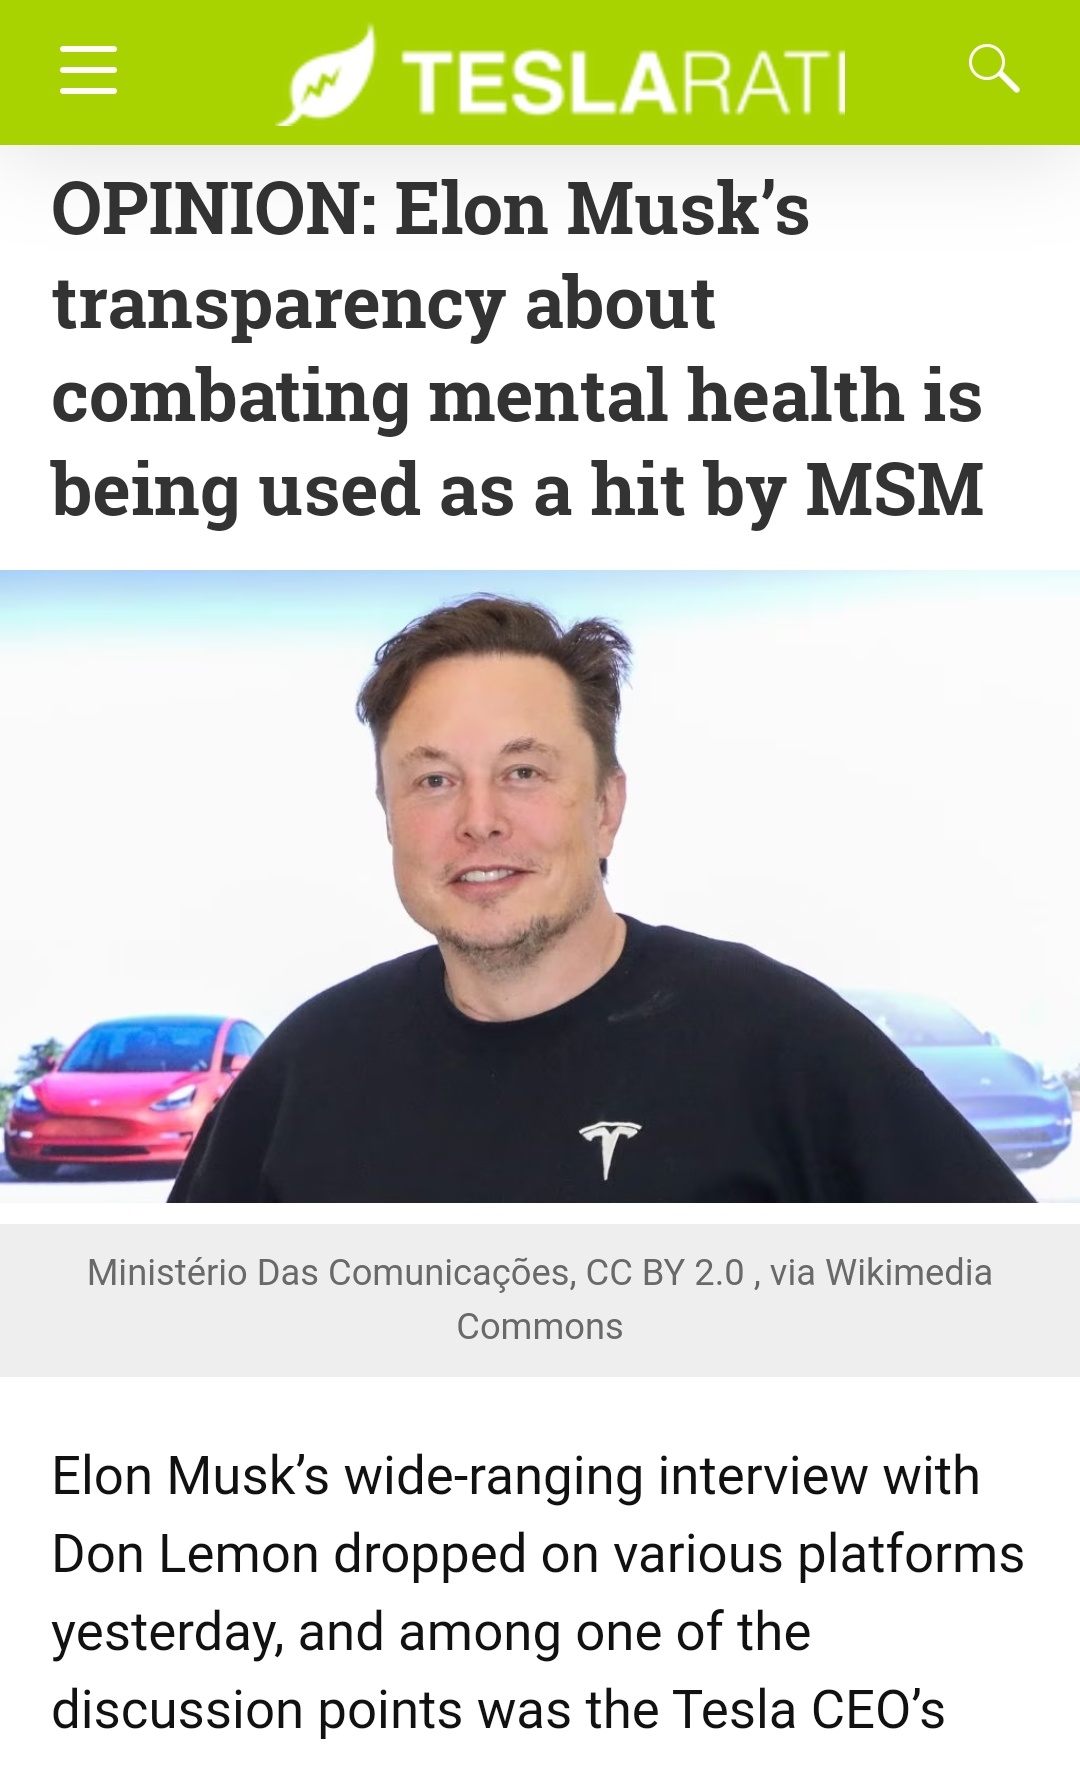 Elon Musk’s transparency about combating mental health is being used as a hit